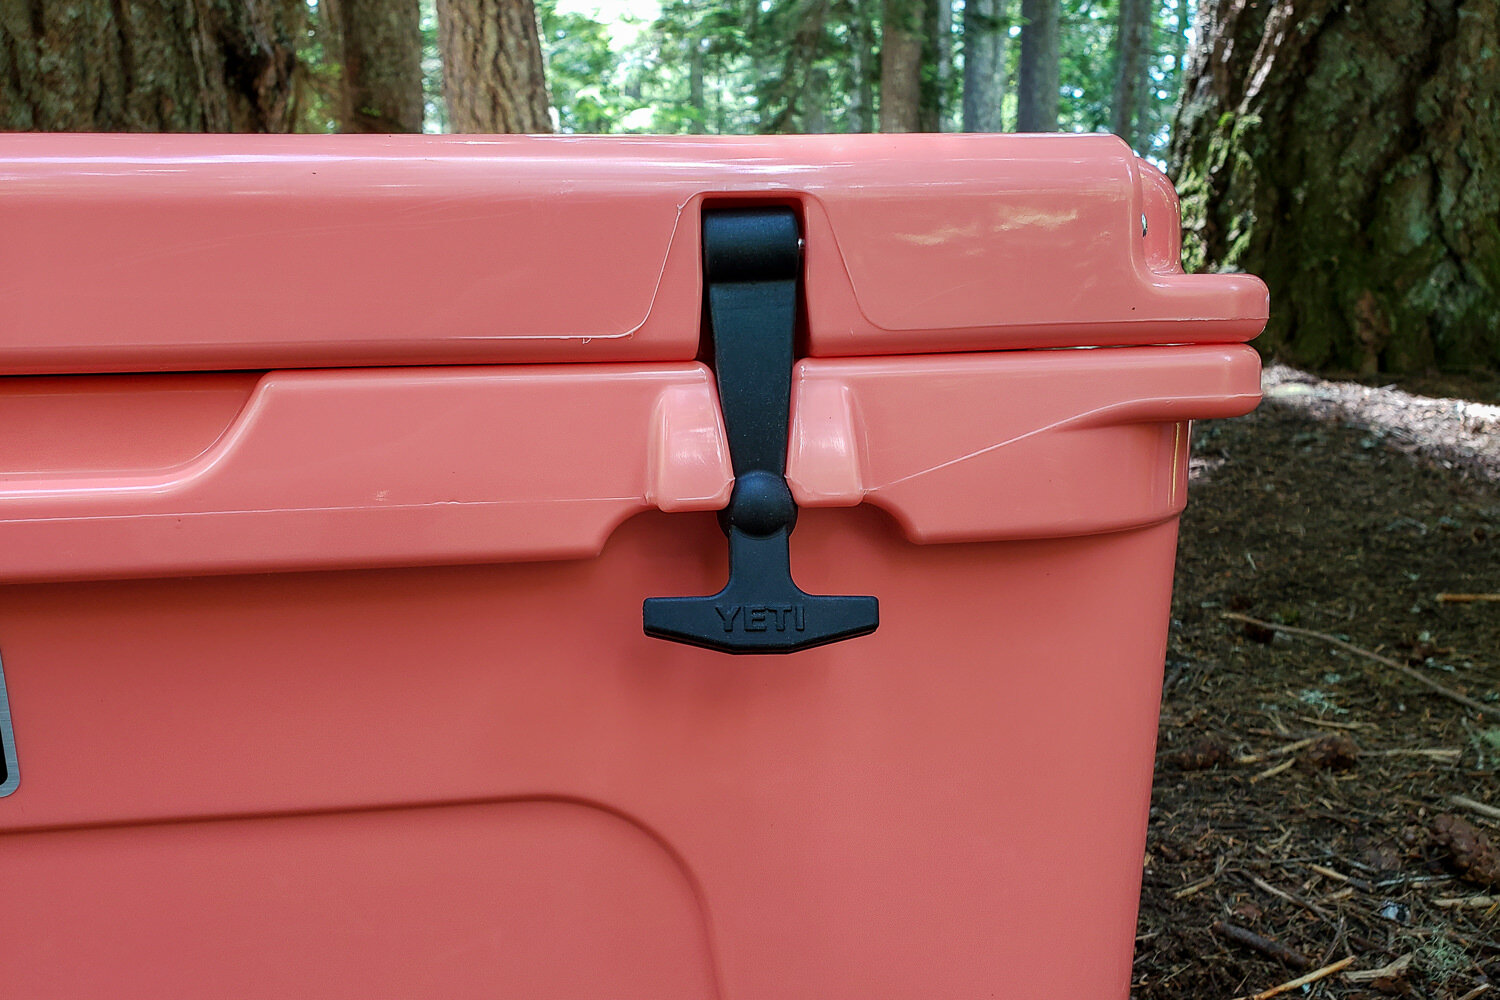 The Yeti Tundra 65 is incredibly bomb-proof with it's rubber latches, built-in hinges, and rigid insulation